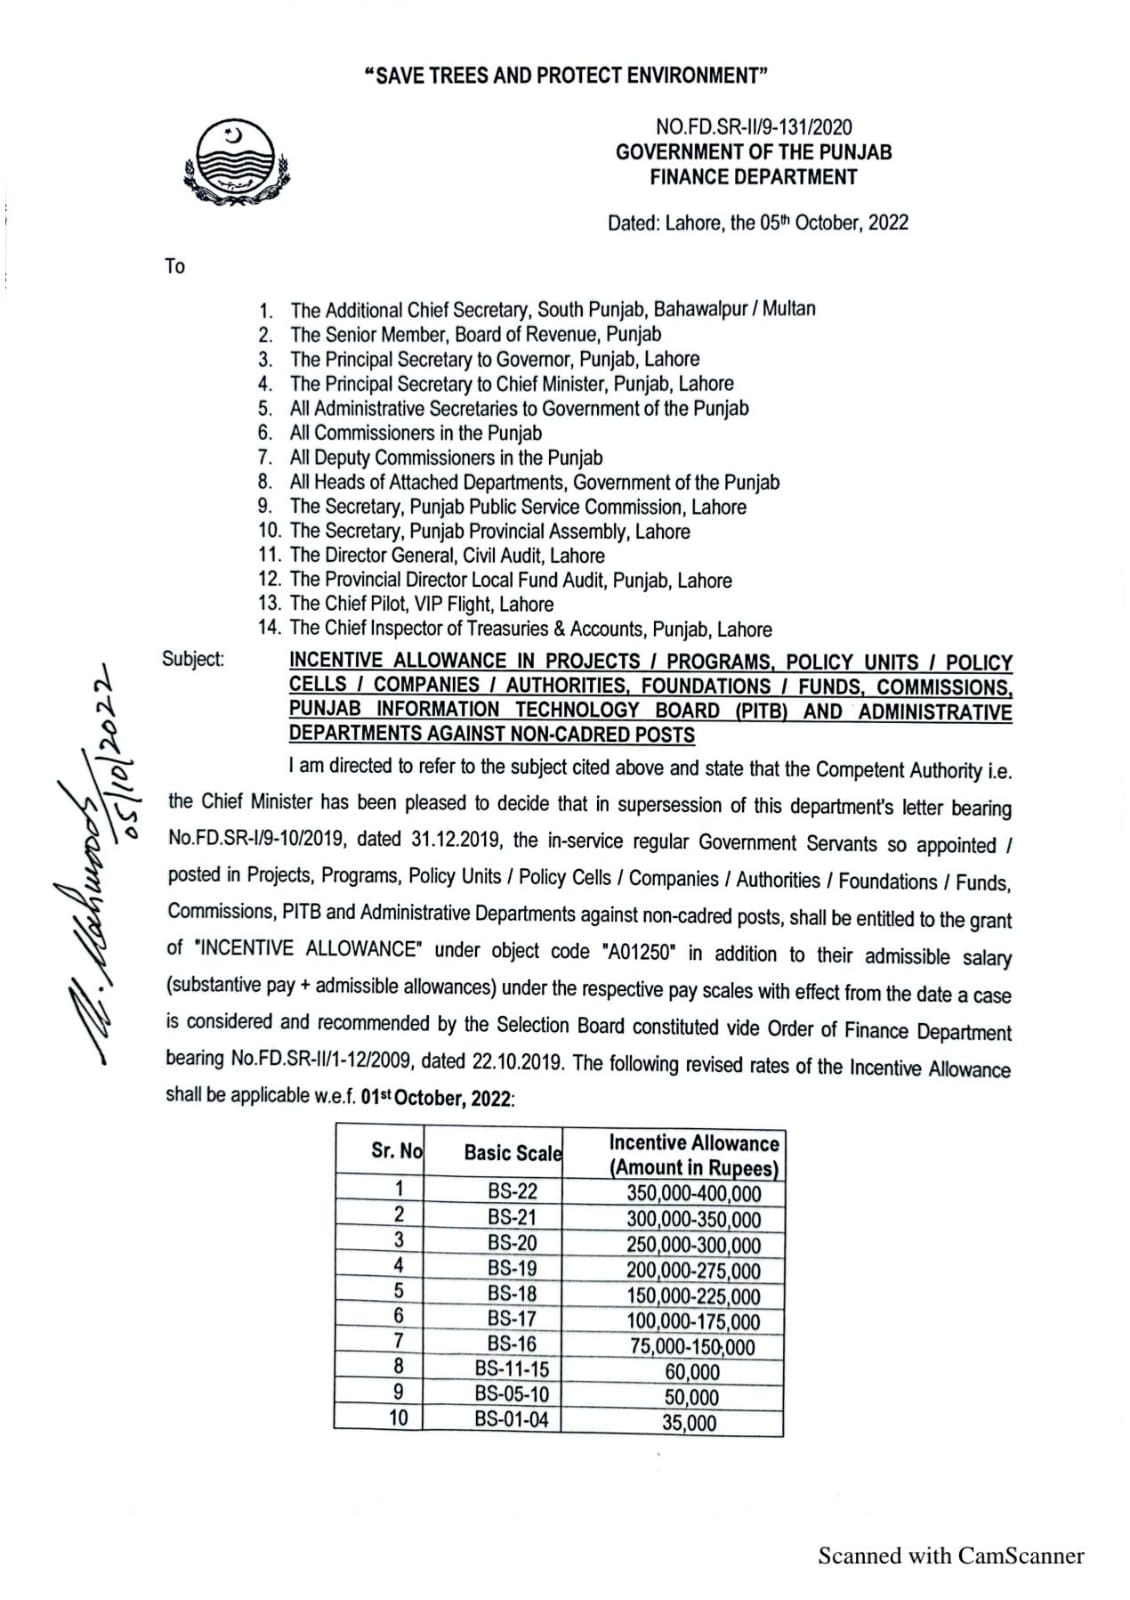 Notification Revised Incentive Allowance 2022 Rs. 35,000- to Rs. 400,000-